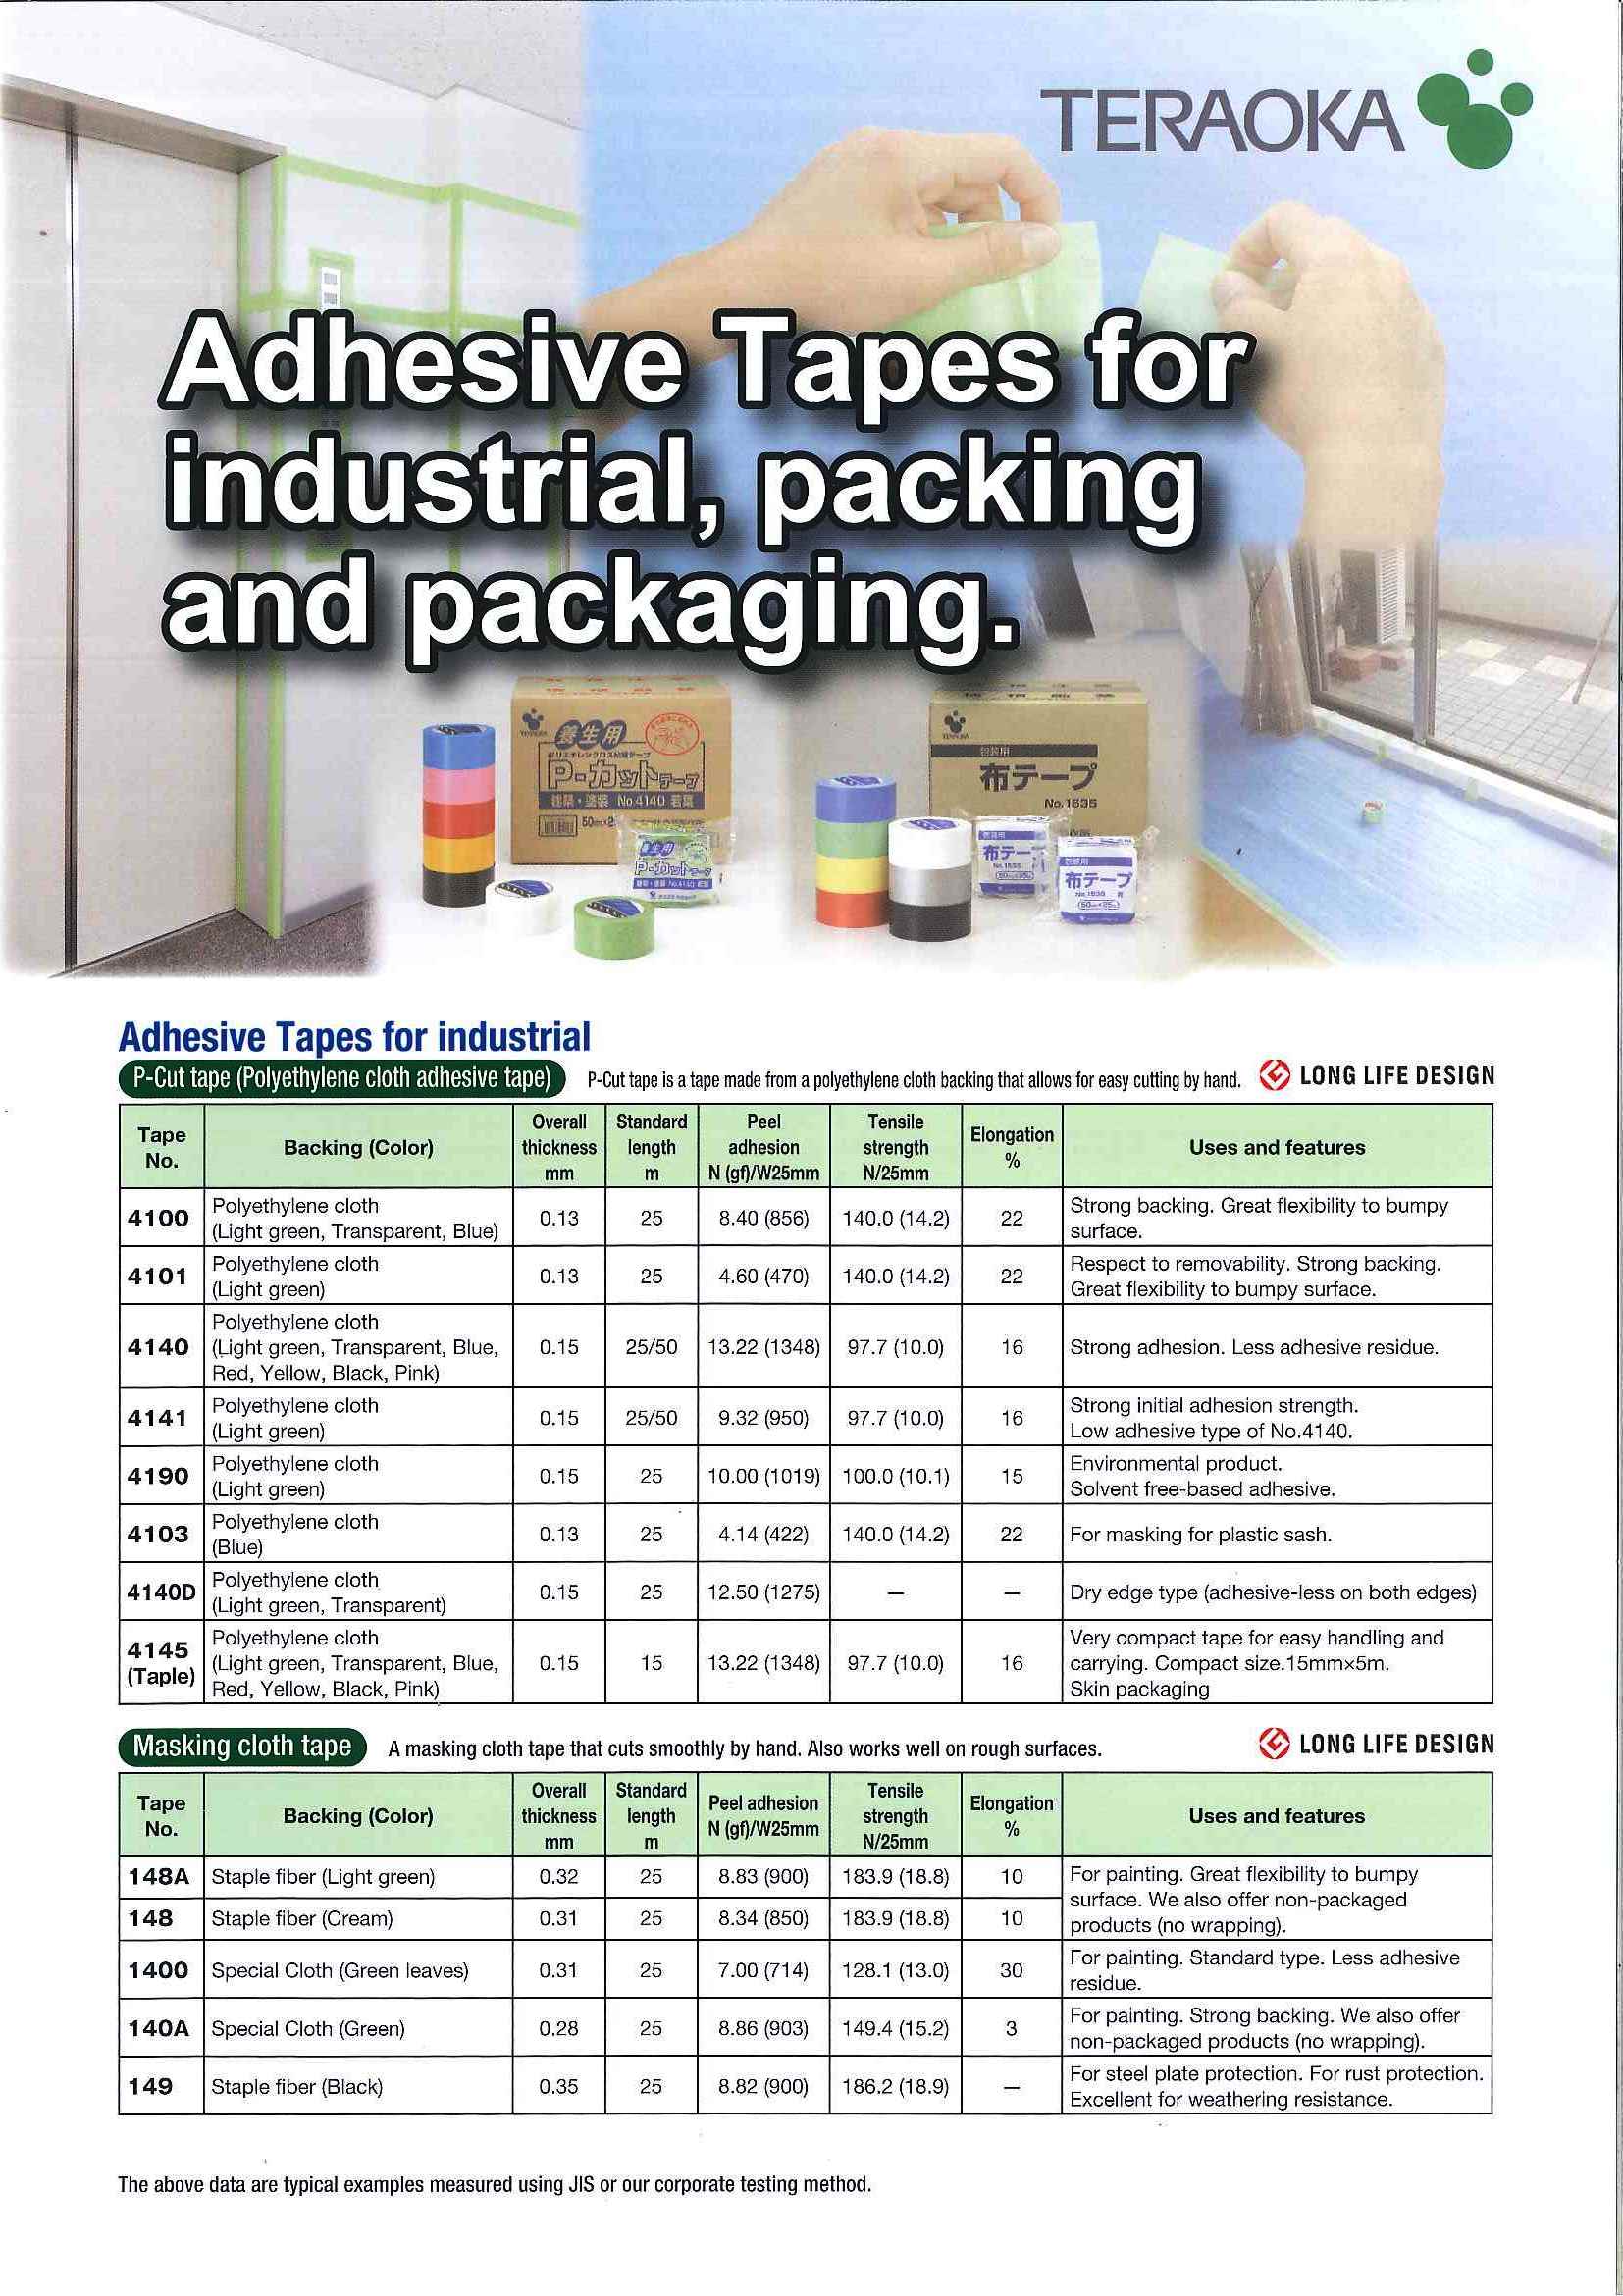 Adhesive Tapes for industrial, packing and packaging Catalog